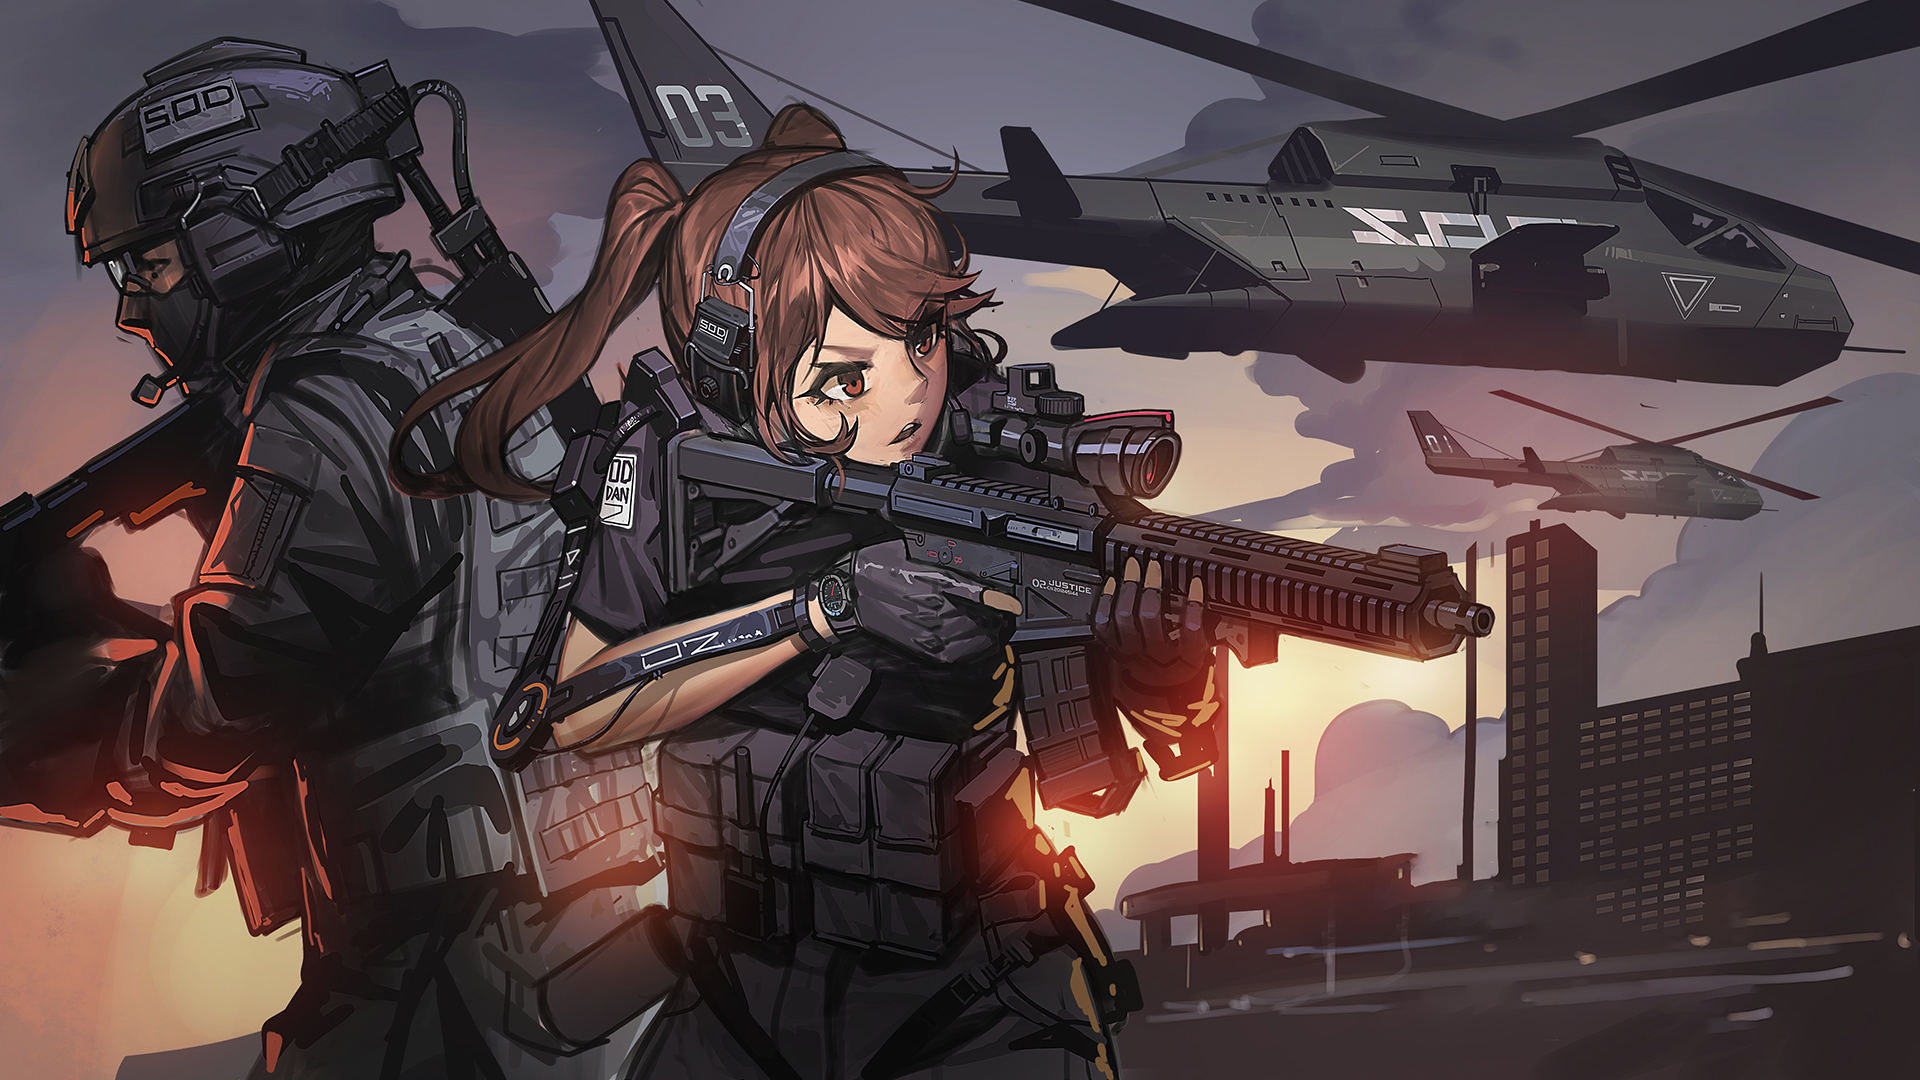 Helicopters Gun Exoskeleton Military Black Soldier Girls With Guns 1920x1080